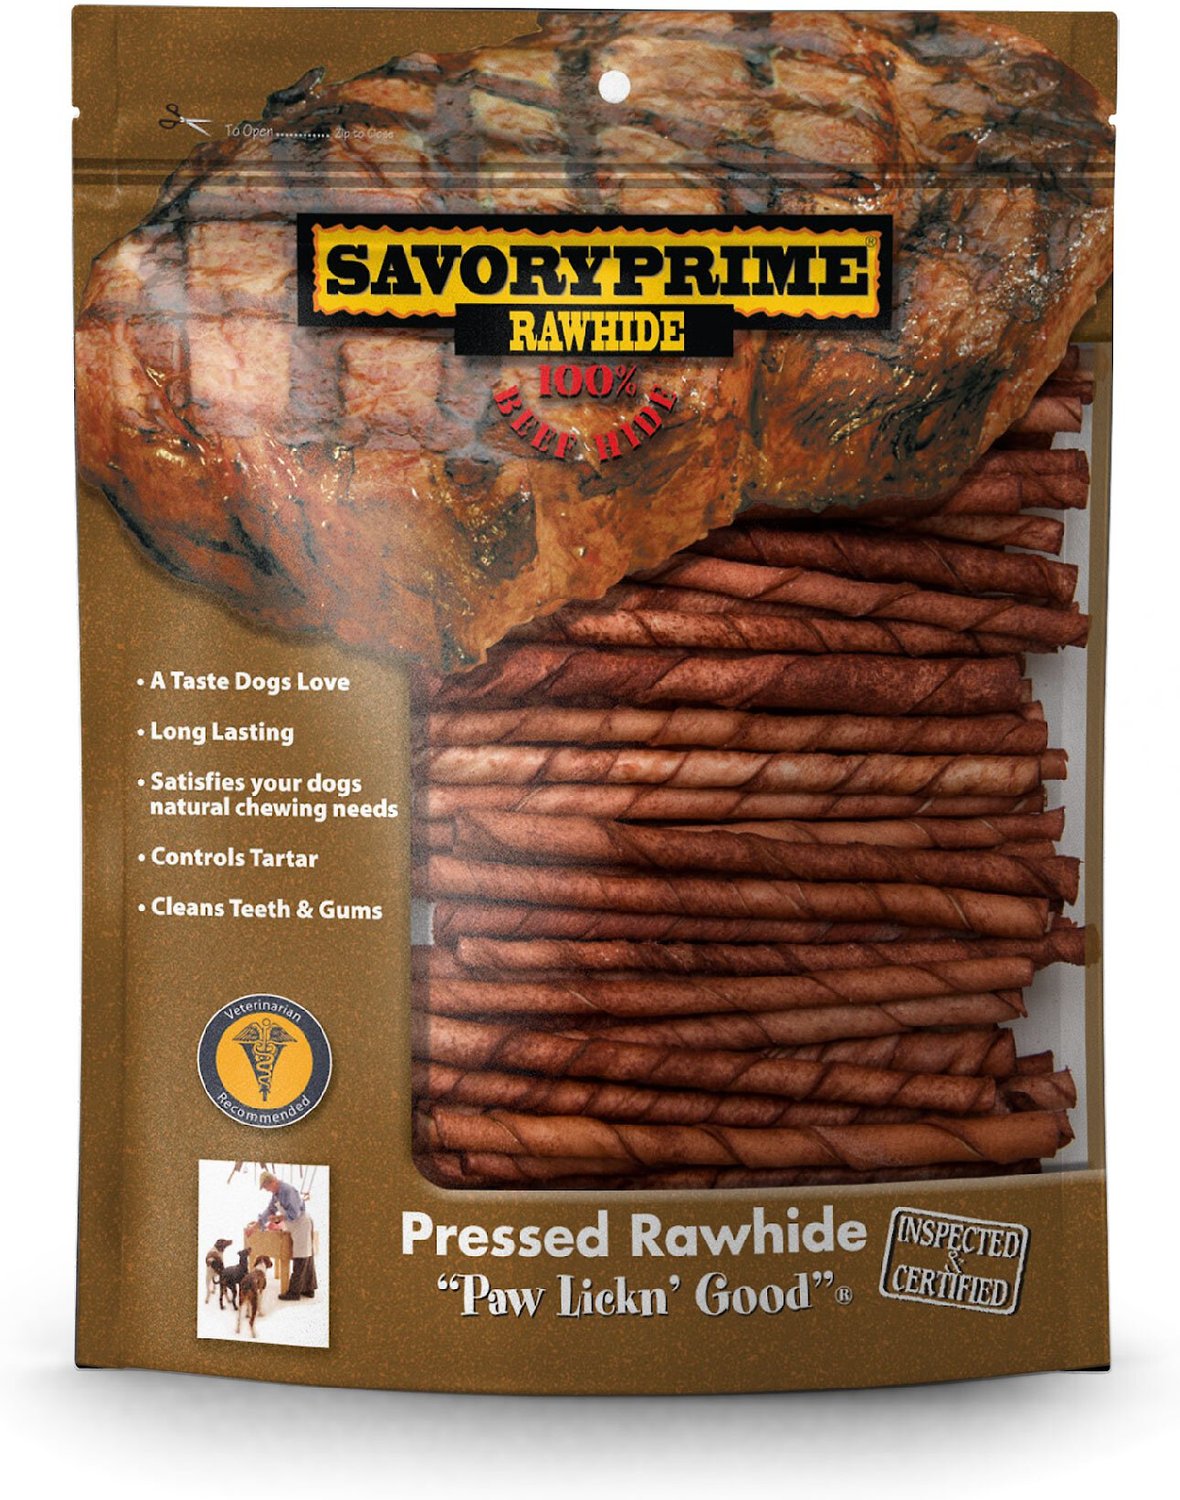 Pedigree Rodeo Chewy twists Dog Treats with Beef 12 Bags 12 x 140 g/Total of 96 Chews